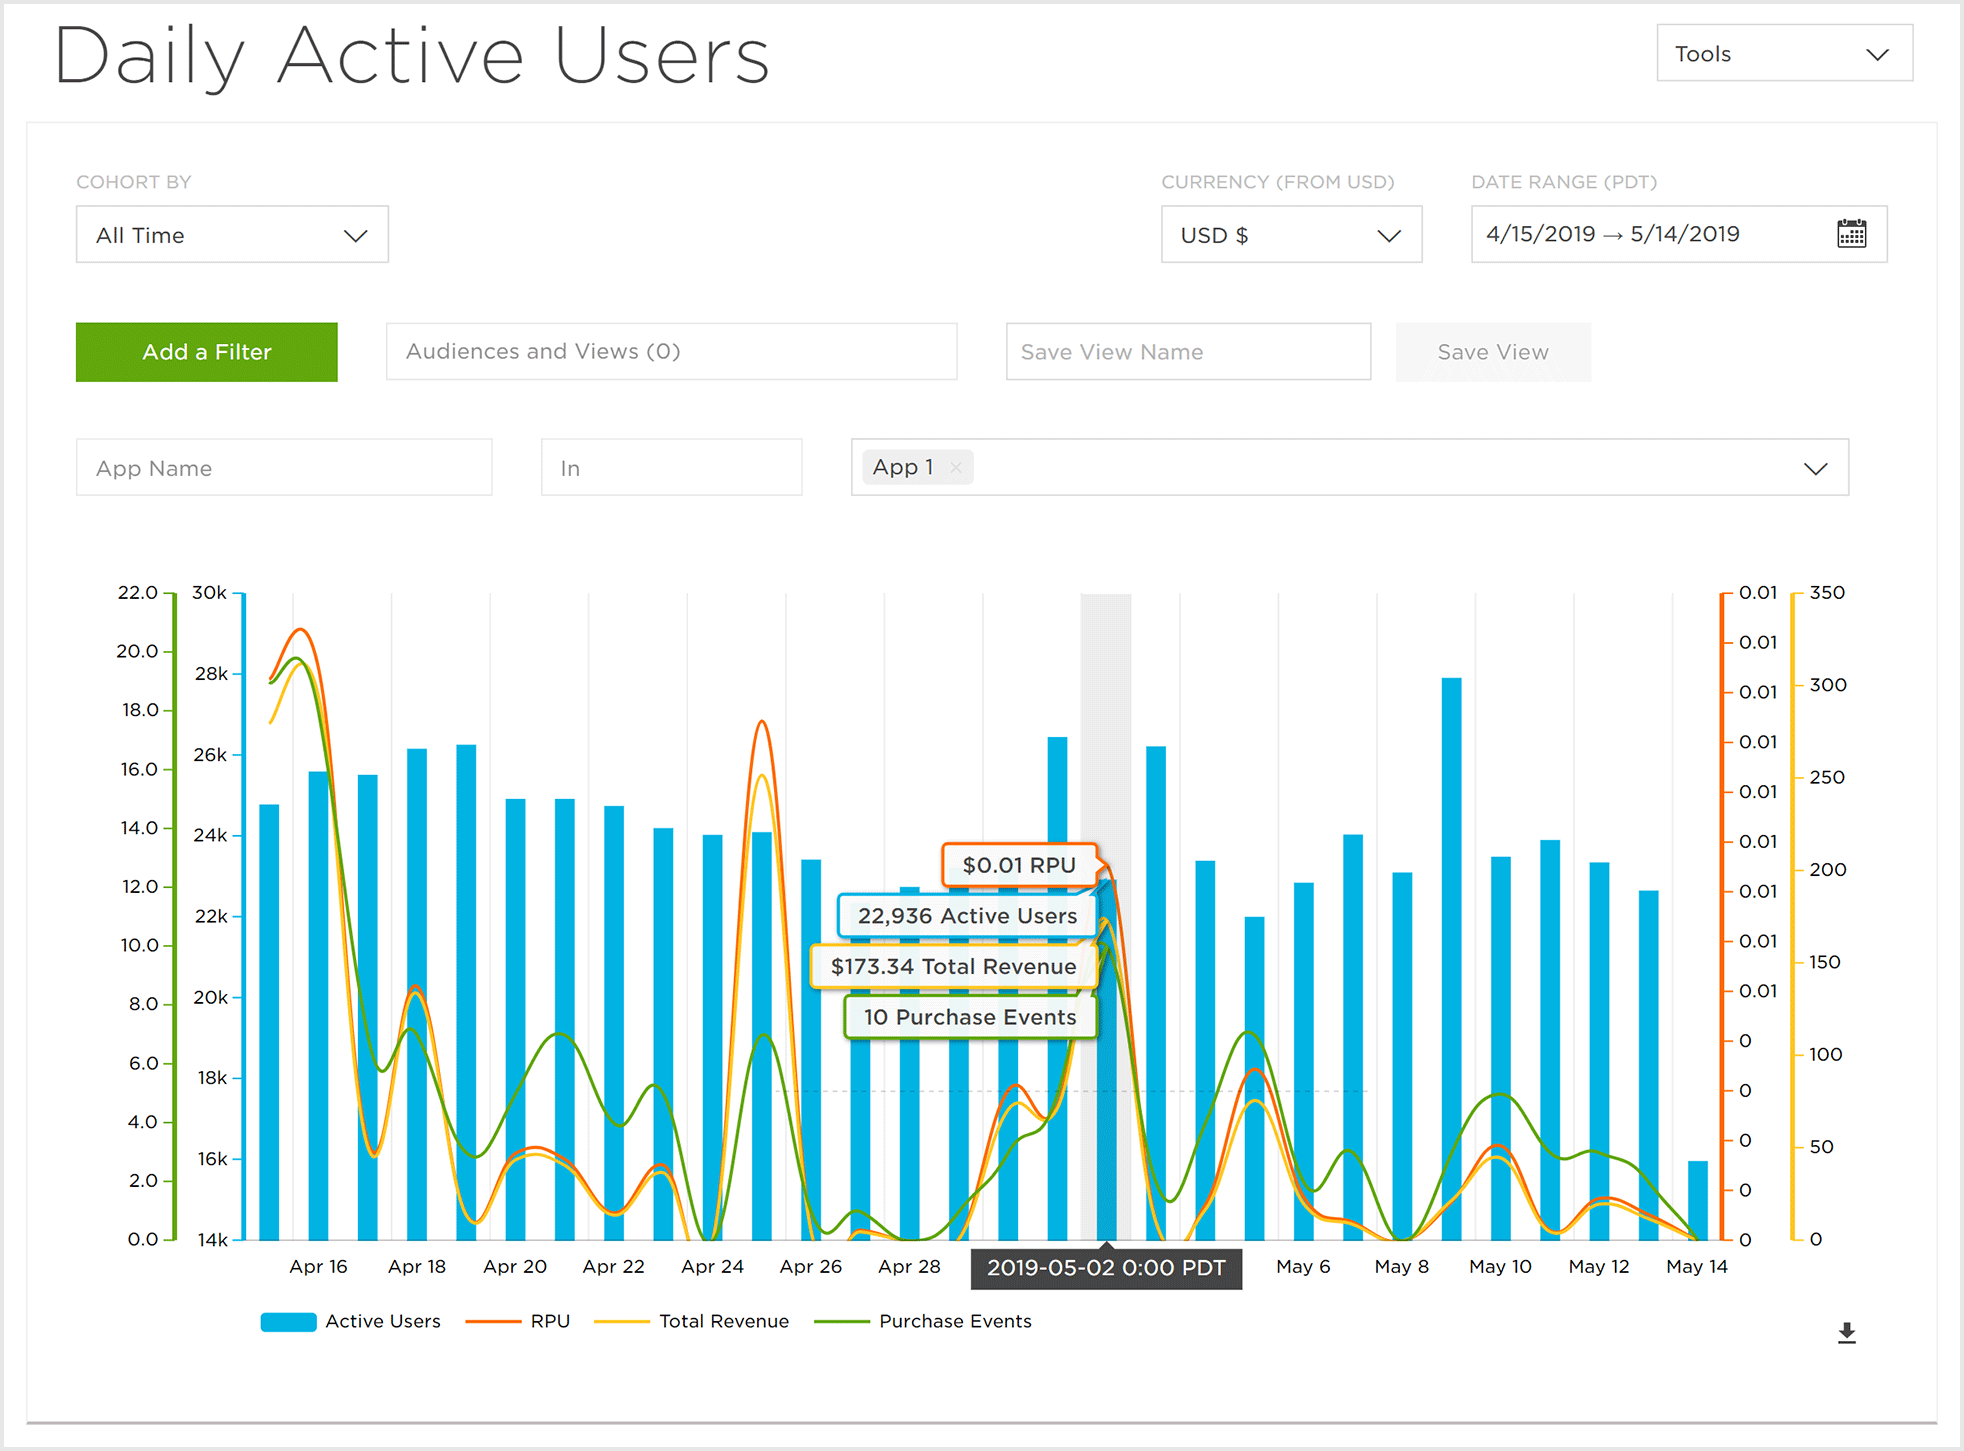 Daily Active Users Overview